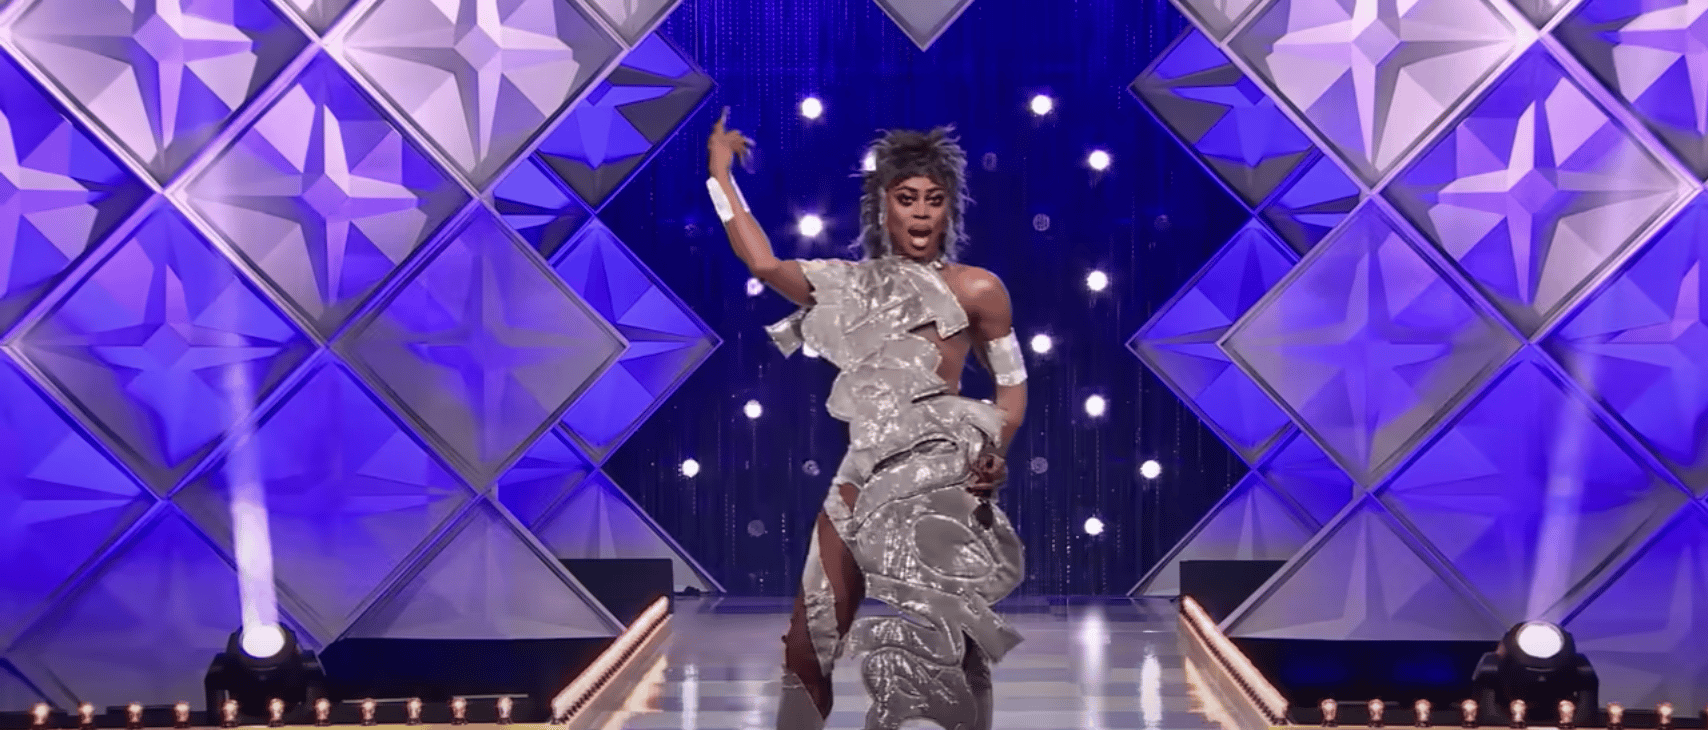 Canadian Prime Minister Justin Trudeau Becomes First World Leader to Appear on ‘Drag Race’